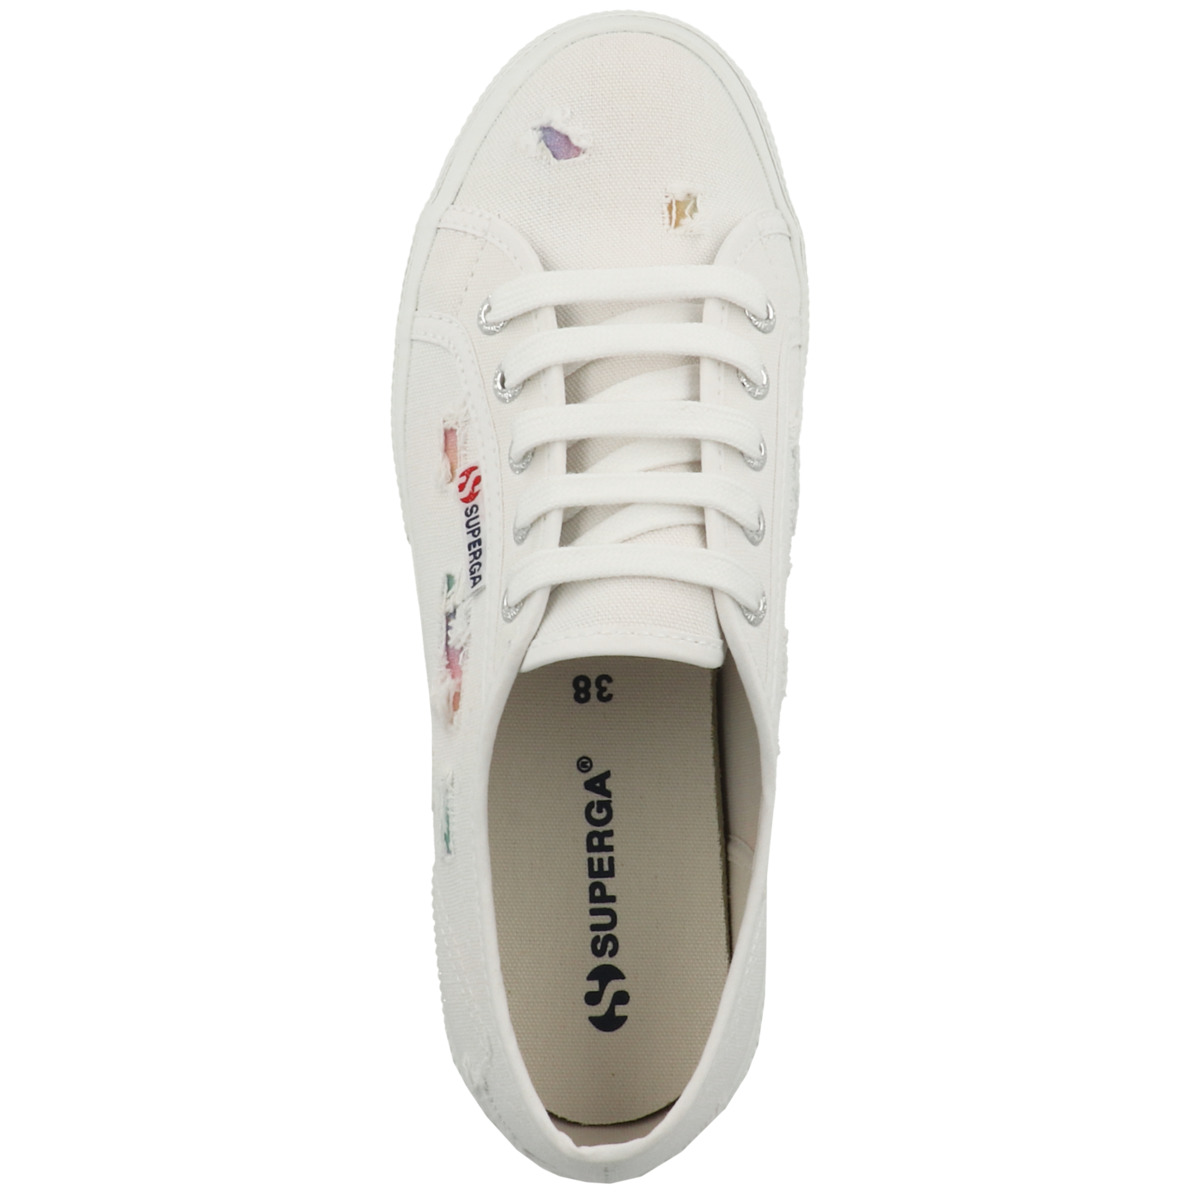 Superga 2750 Ripped Multicolor Cotton Sneaker weiss